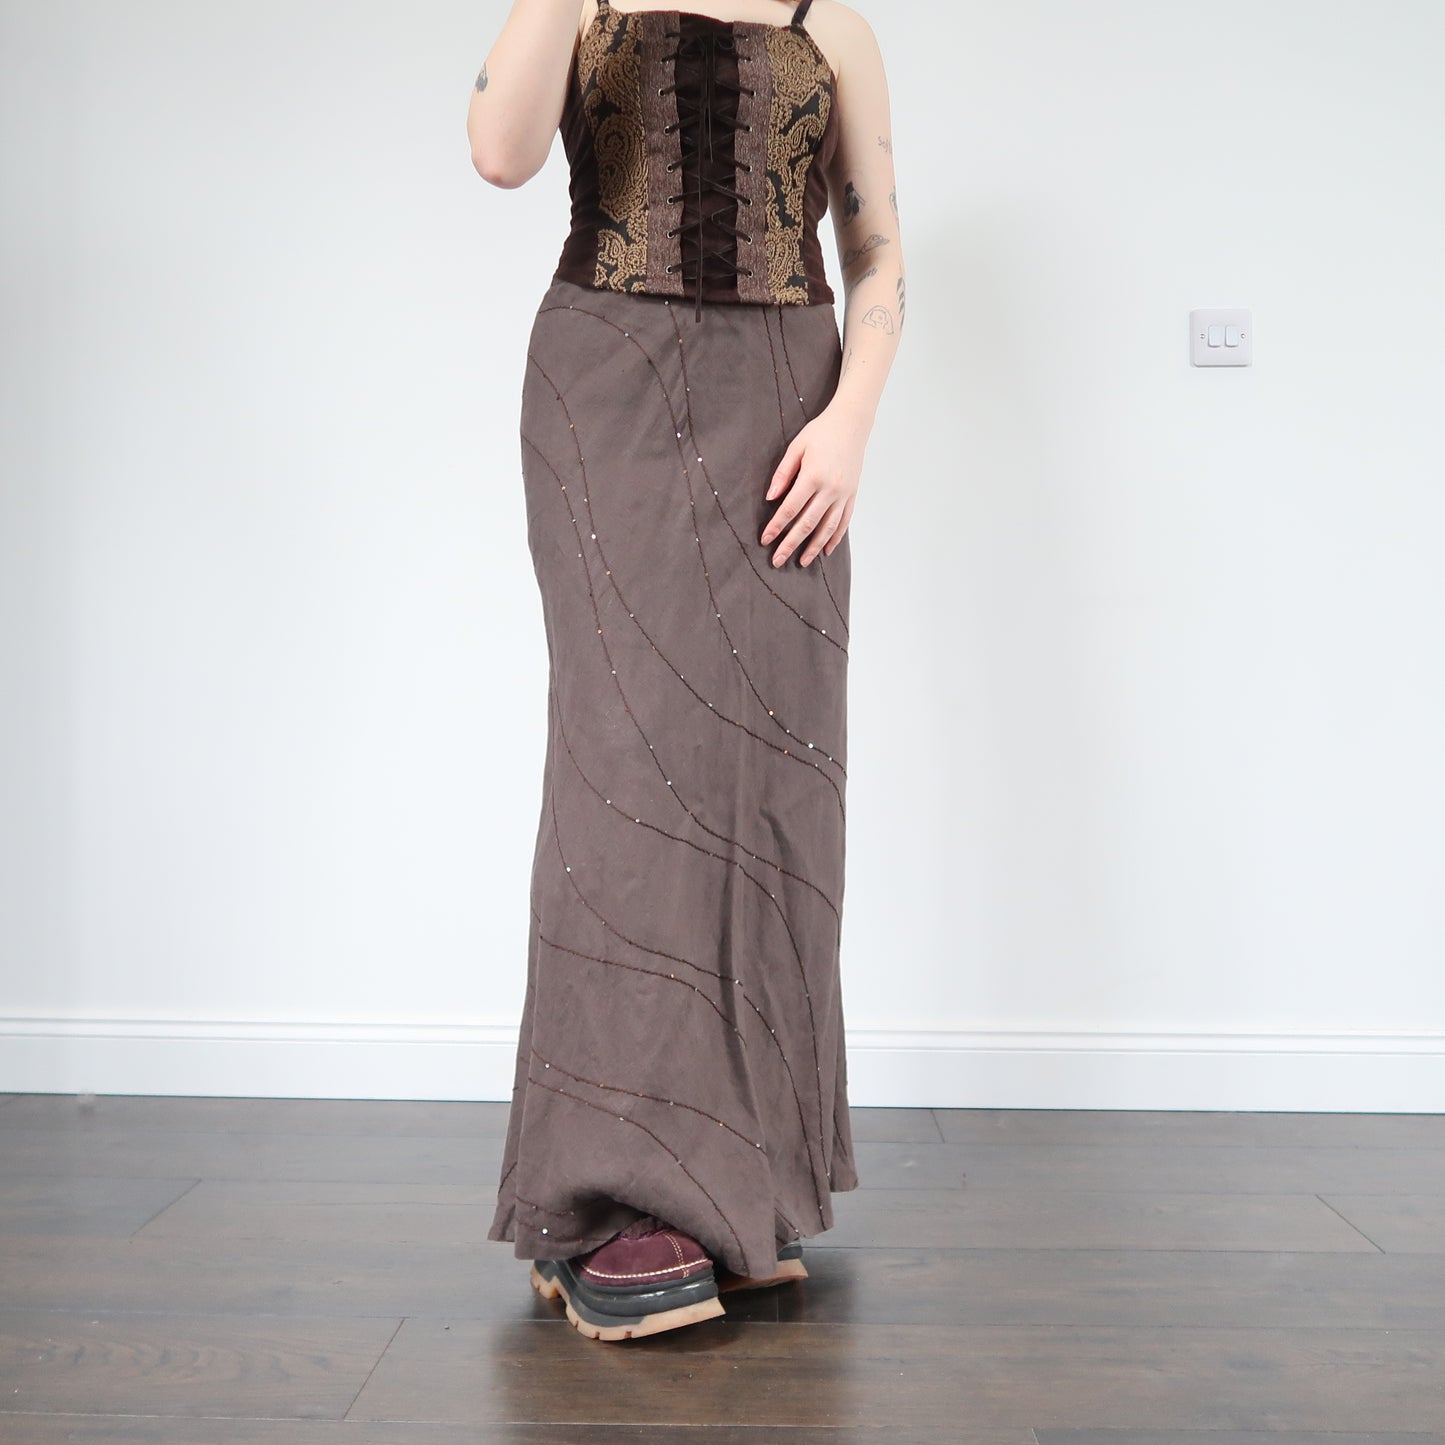 Brown maxi skirt - size 10/12